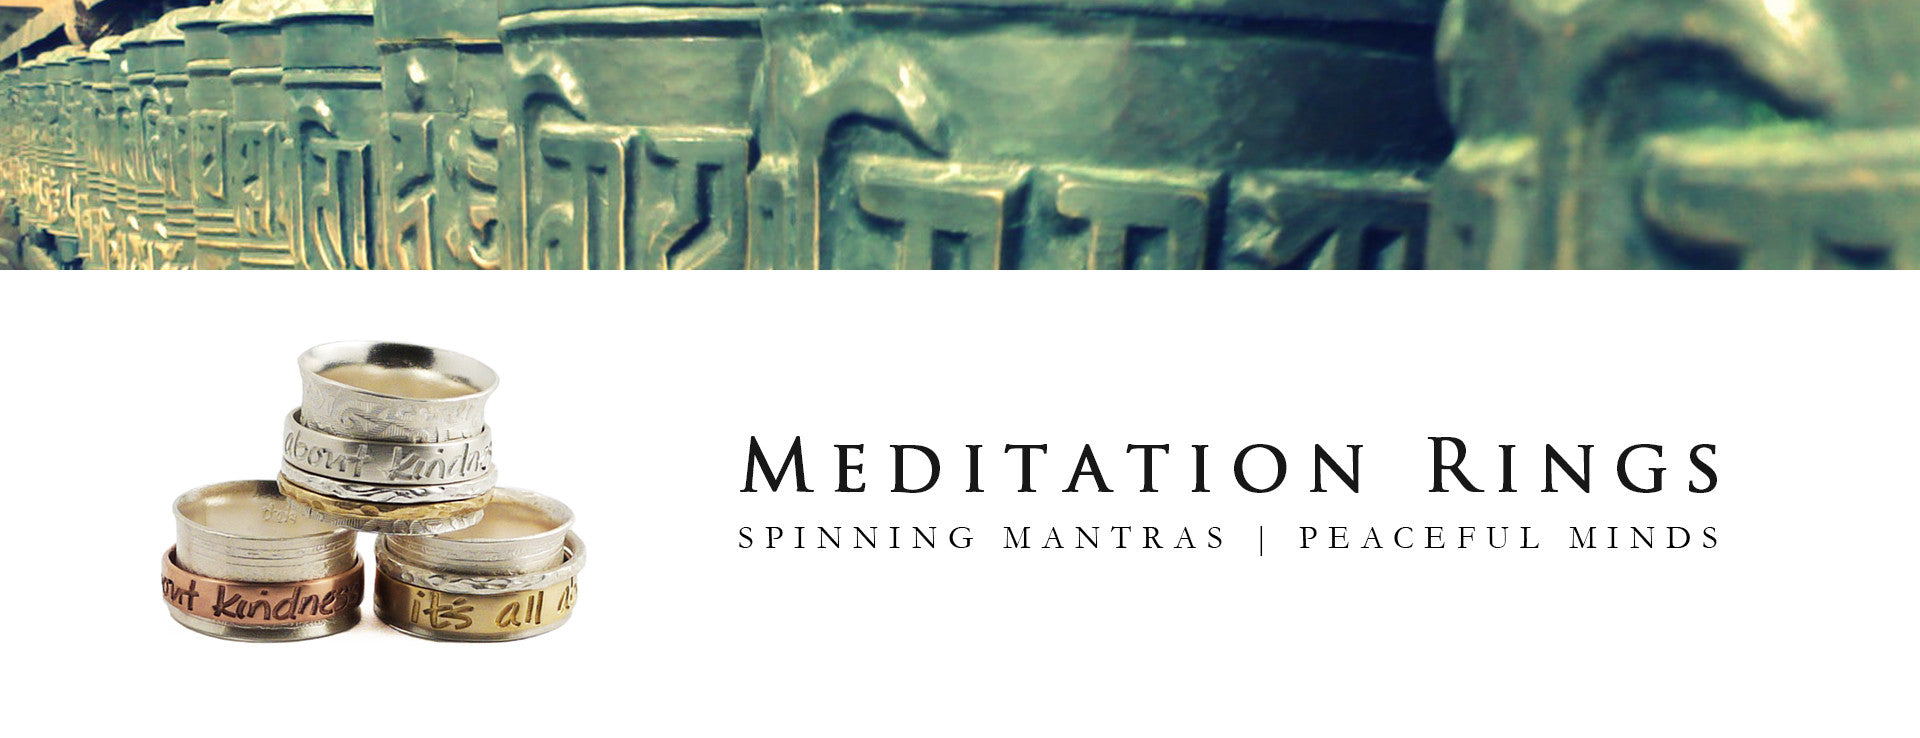 Meditation Rings - How do they work?